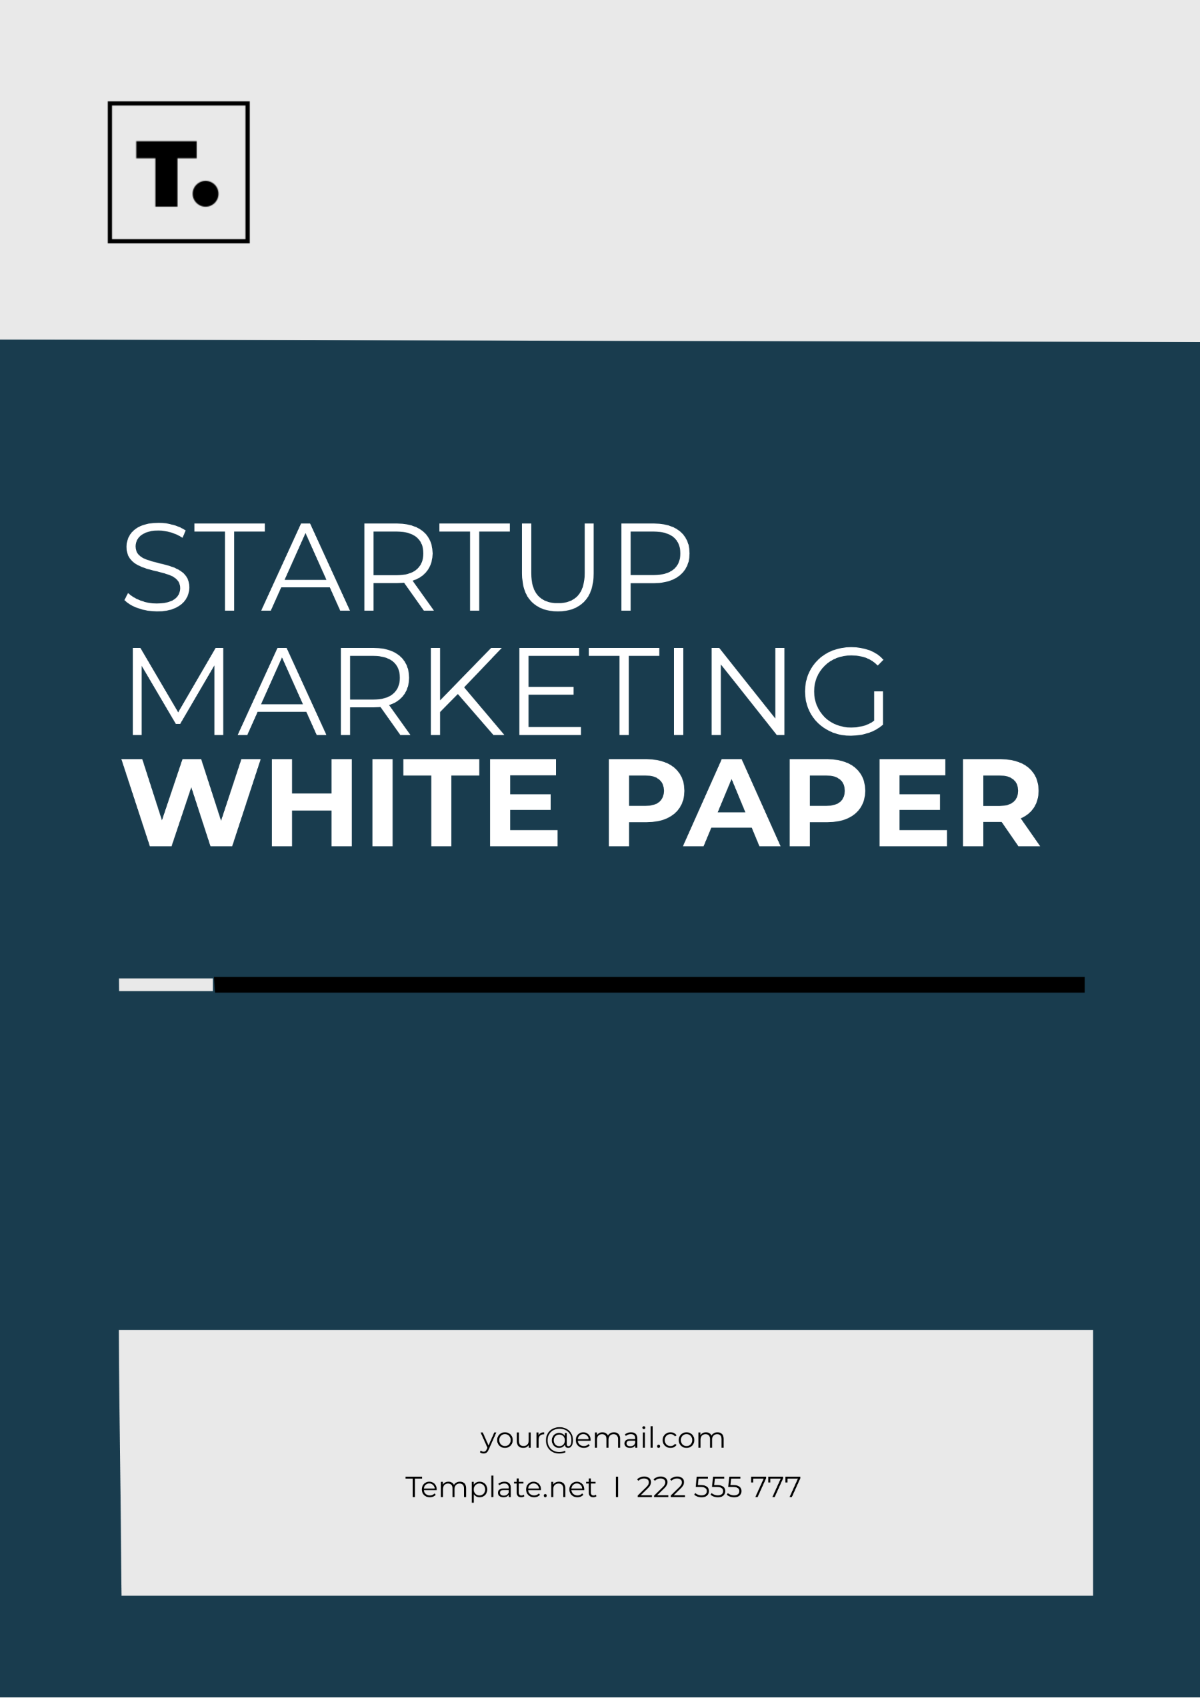 Startup Marketing White Paper Template